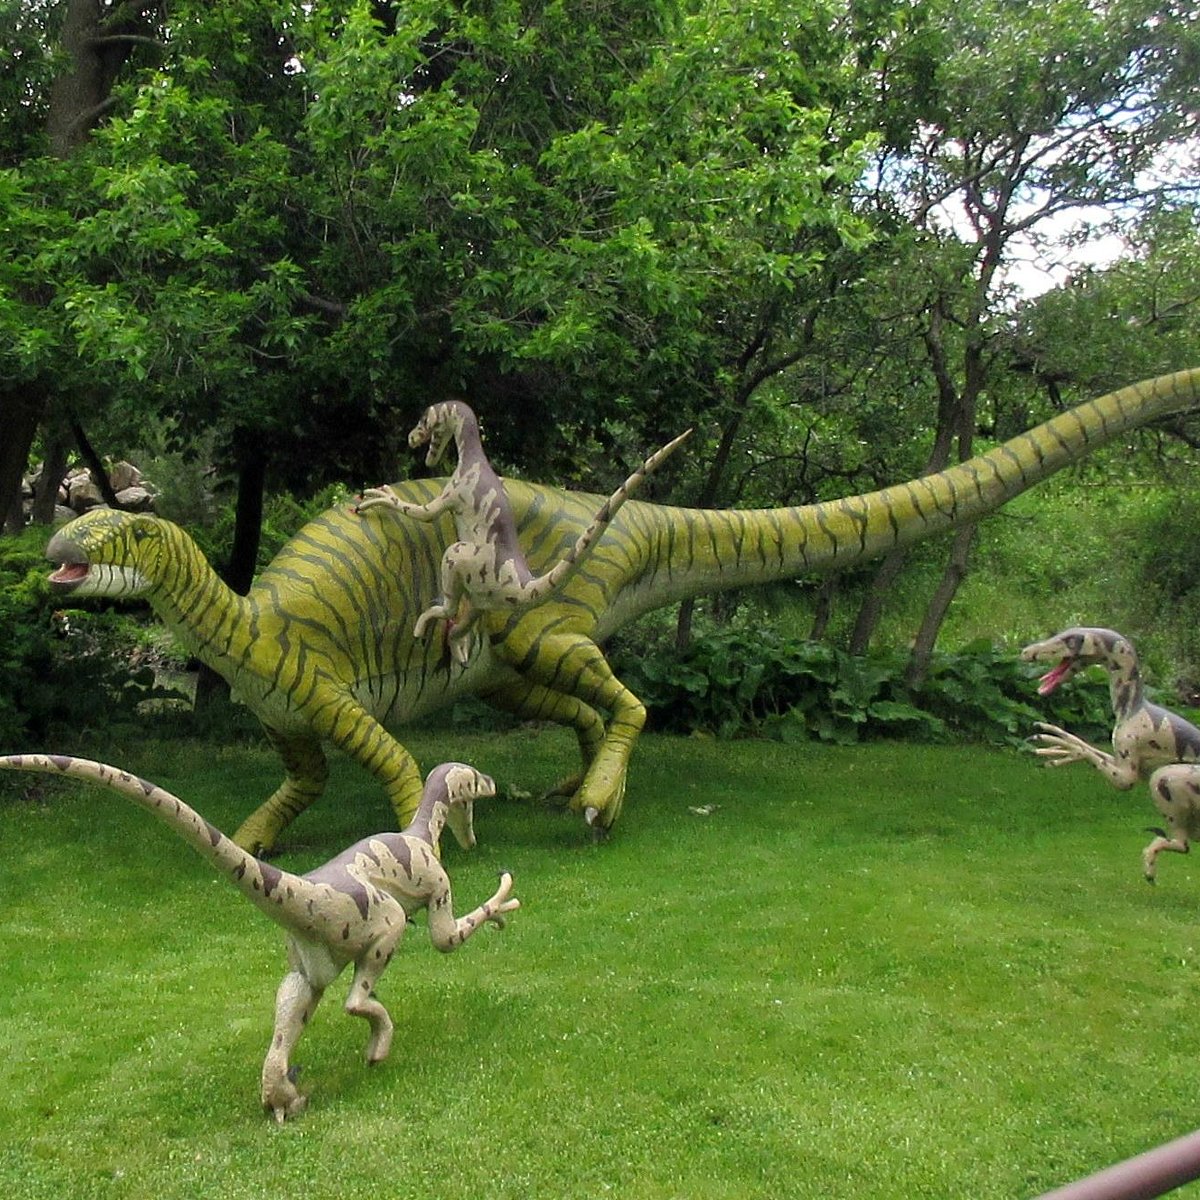 George S Eccles Dinosaur Park Ogden All You Need To Know Before You Go